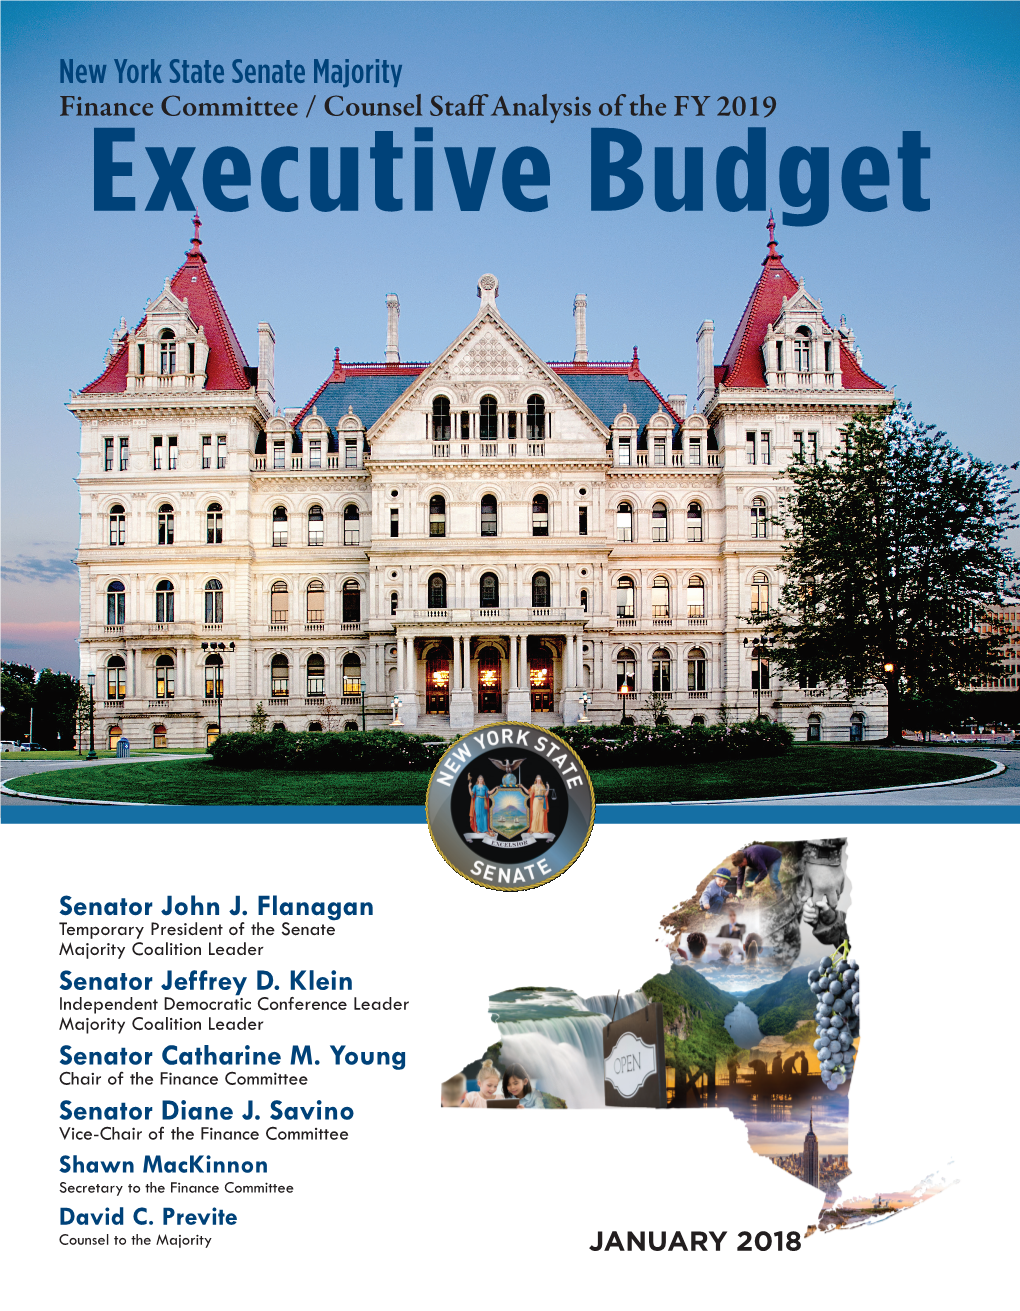 New York State Senate Majority Finance Committee / Counsel Staff Analysis of the FY 2019 Executive Budget